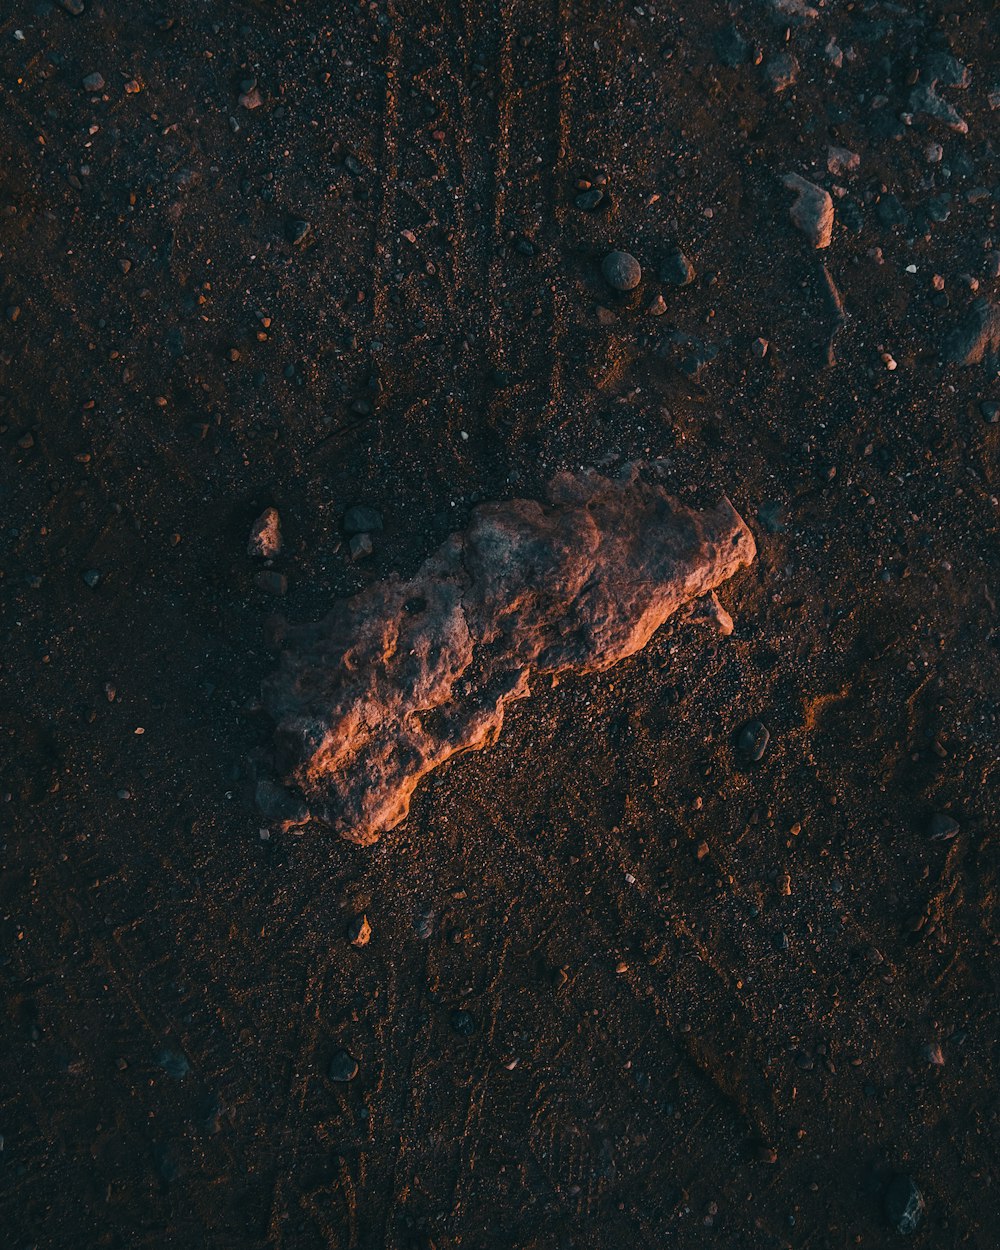 a piece of food that is laying on the ground